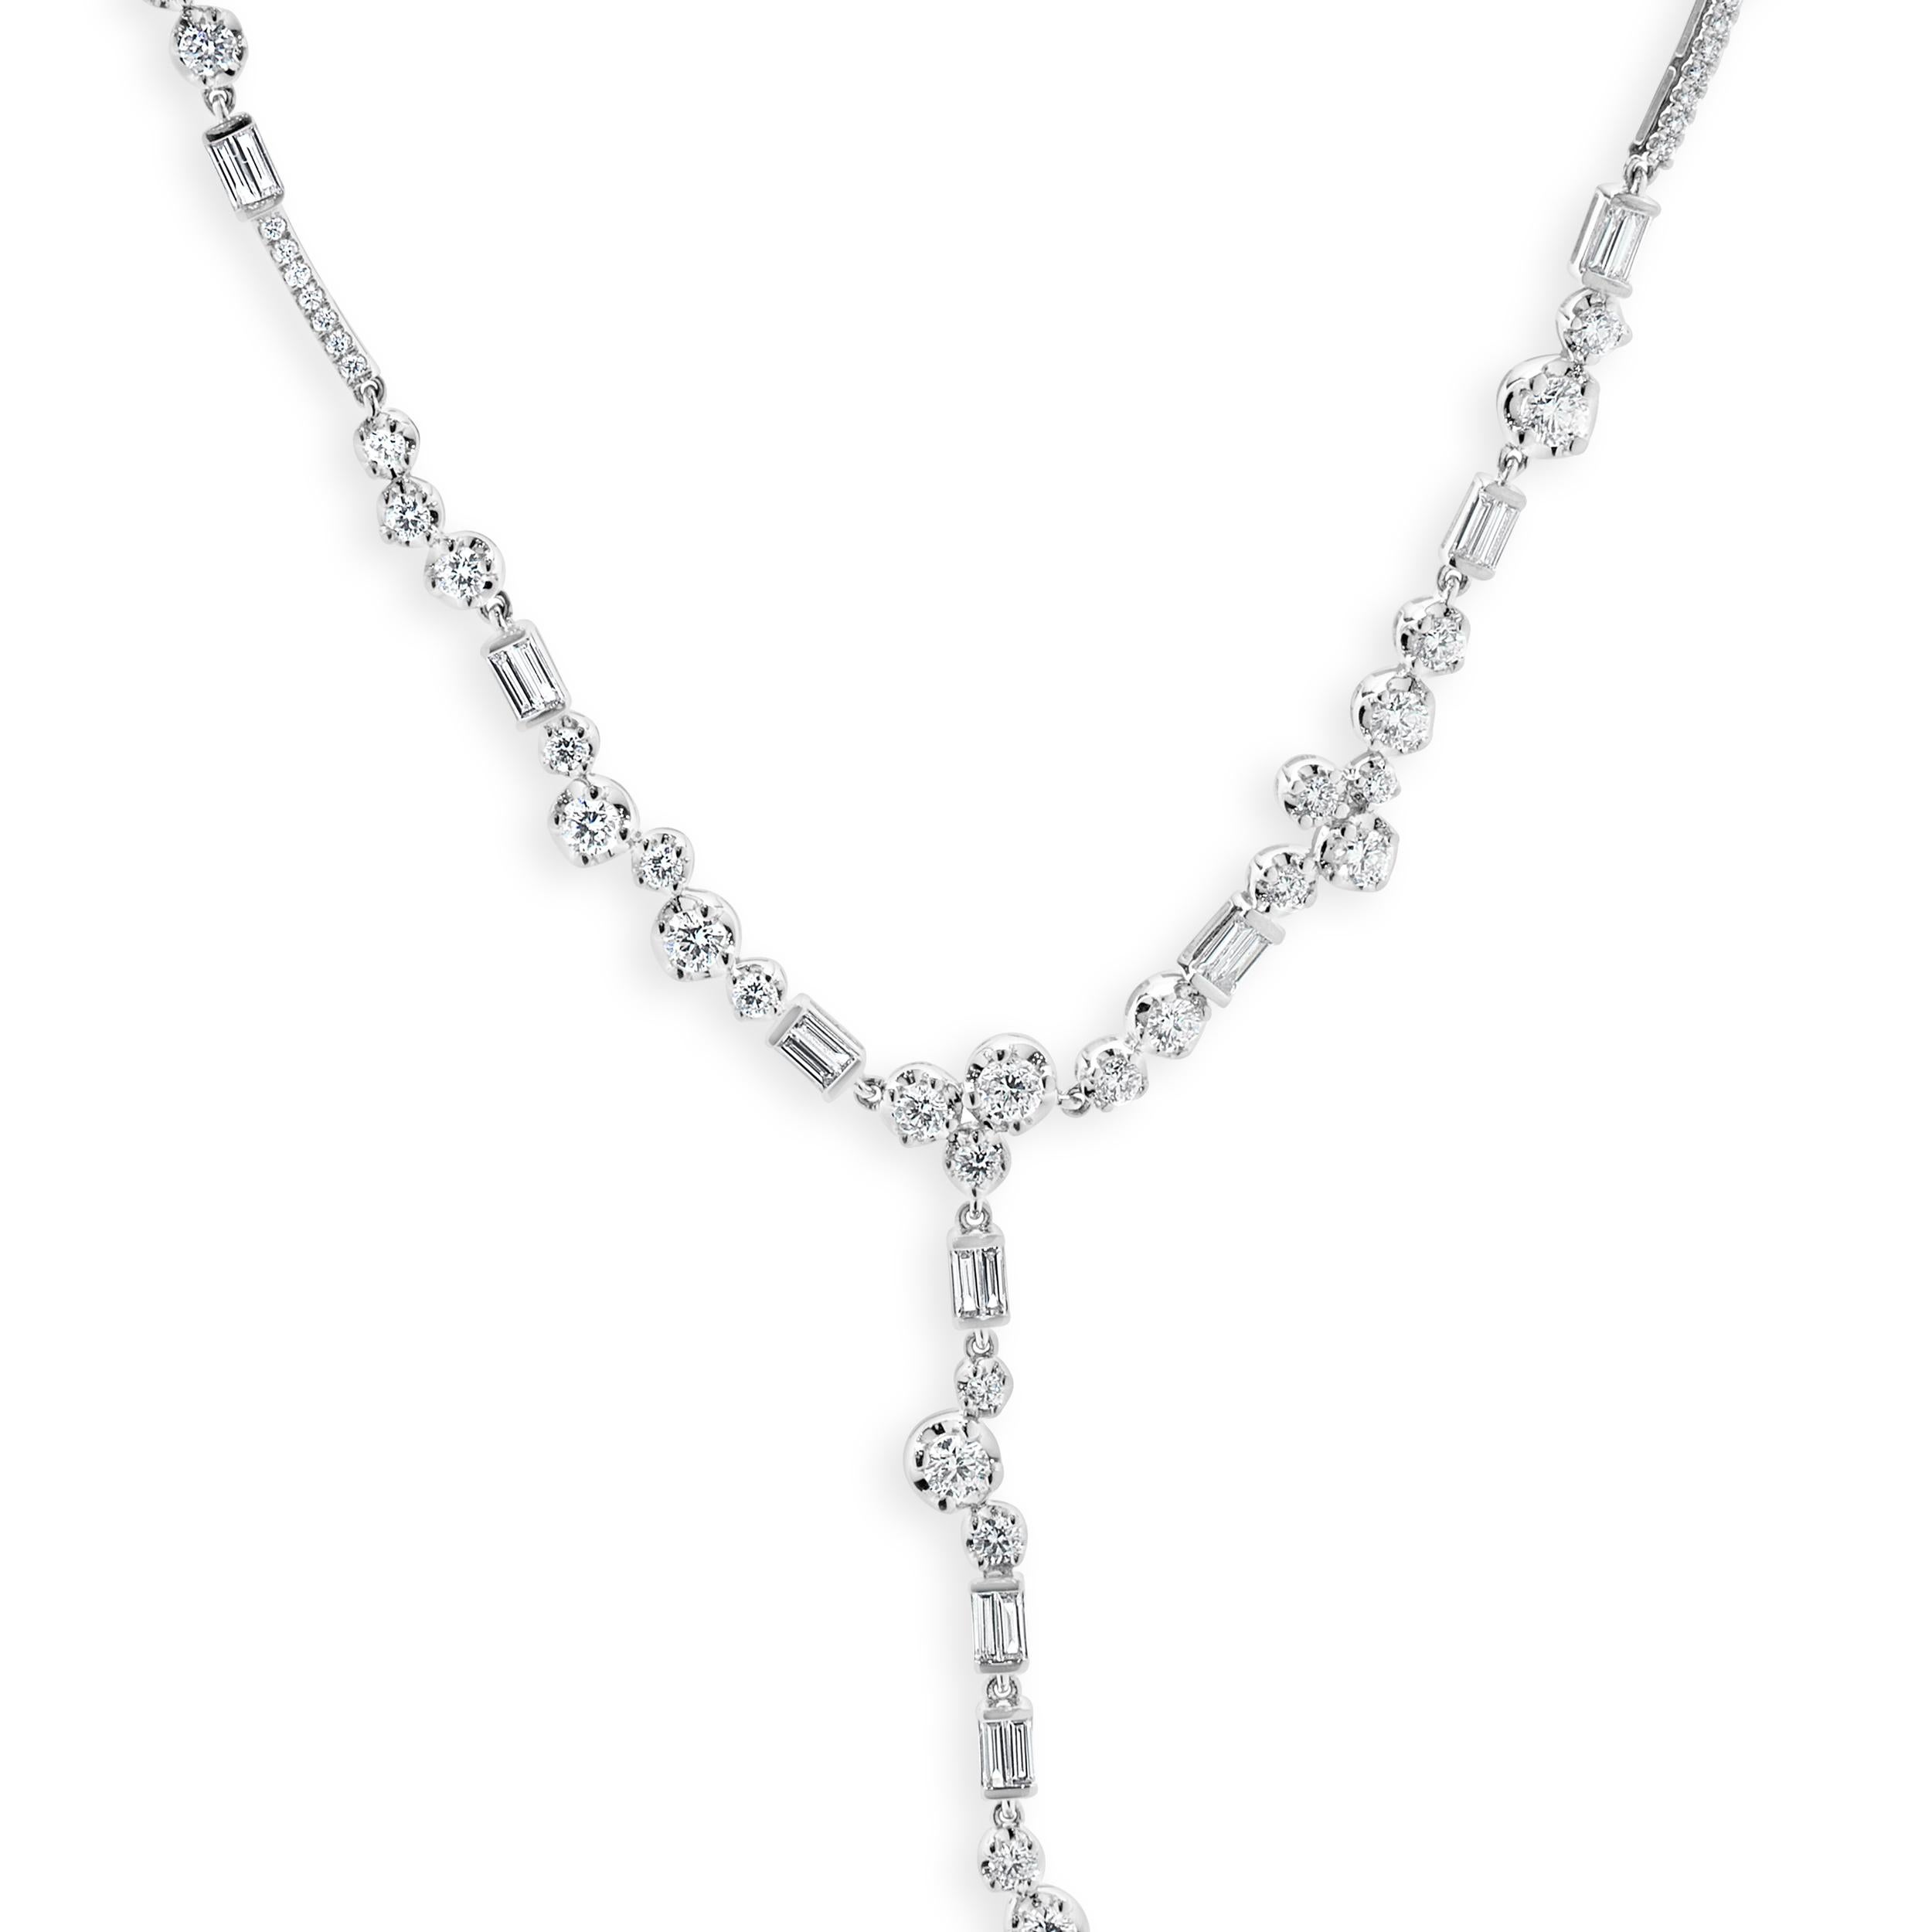 Designer: custom
Material: 18K white gold
Diamonds: 94 round brilliant cut = 2.34cttw
Color: G
Clarity: VS1-2
Diamonds: 20 baguette cut = 0.48cttw
Color: G
Clarity: VS1-2
Dimensions: necklace measures 18-inches in length 
Weight: 18.92 grams
